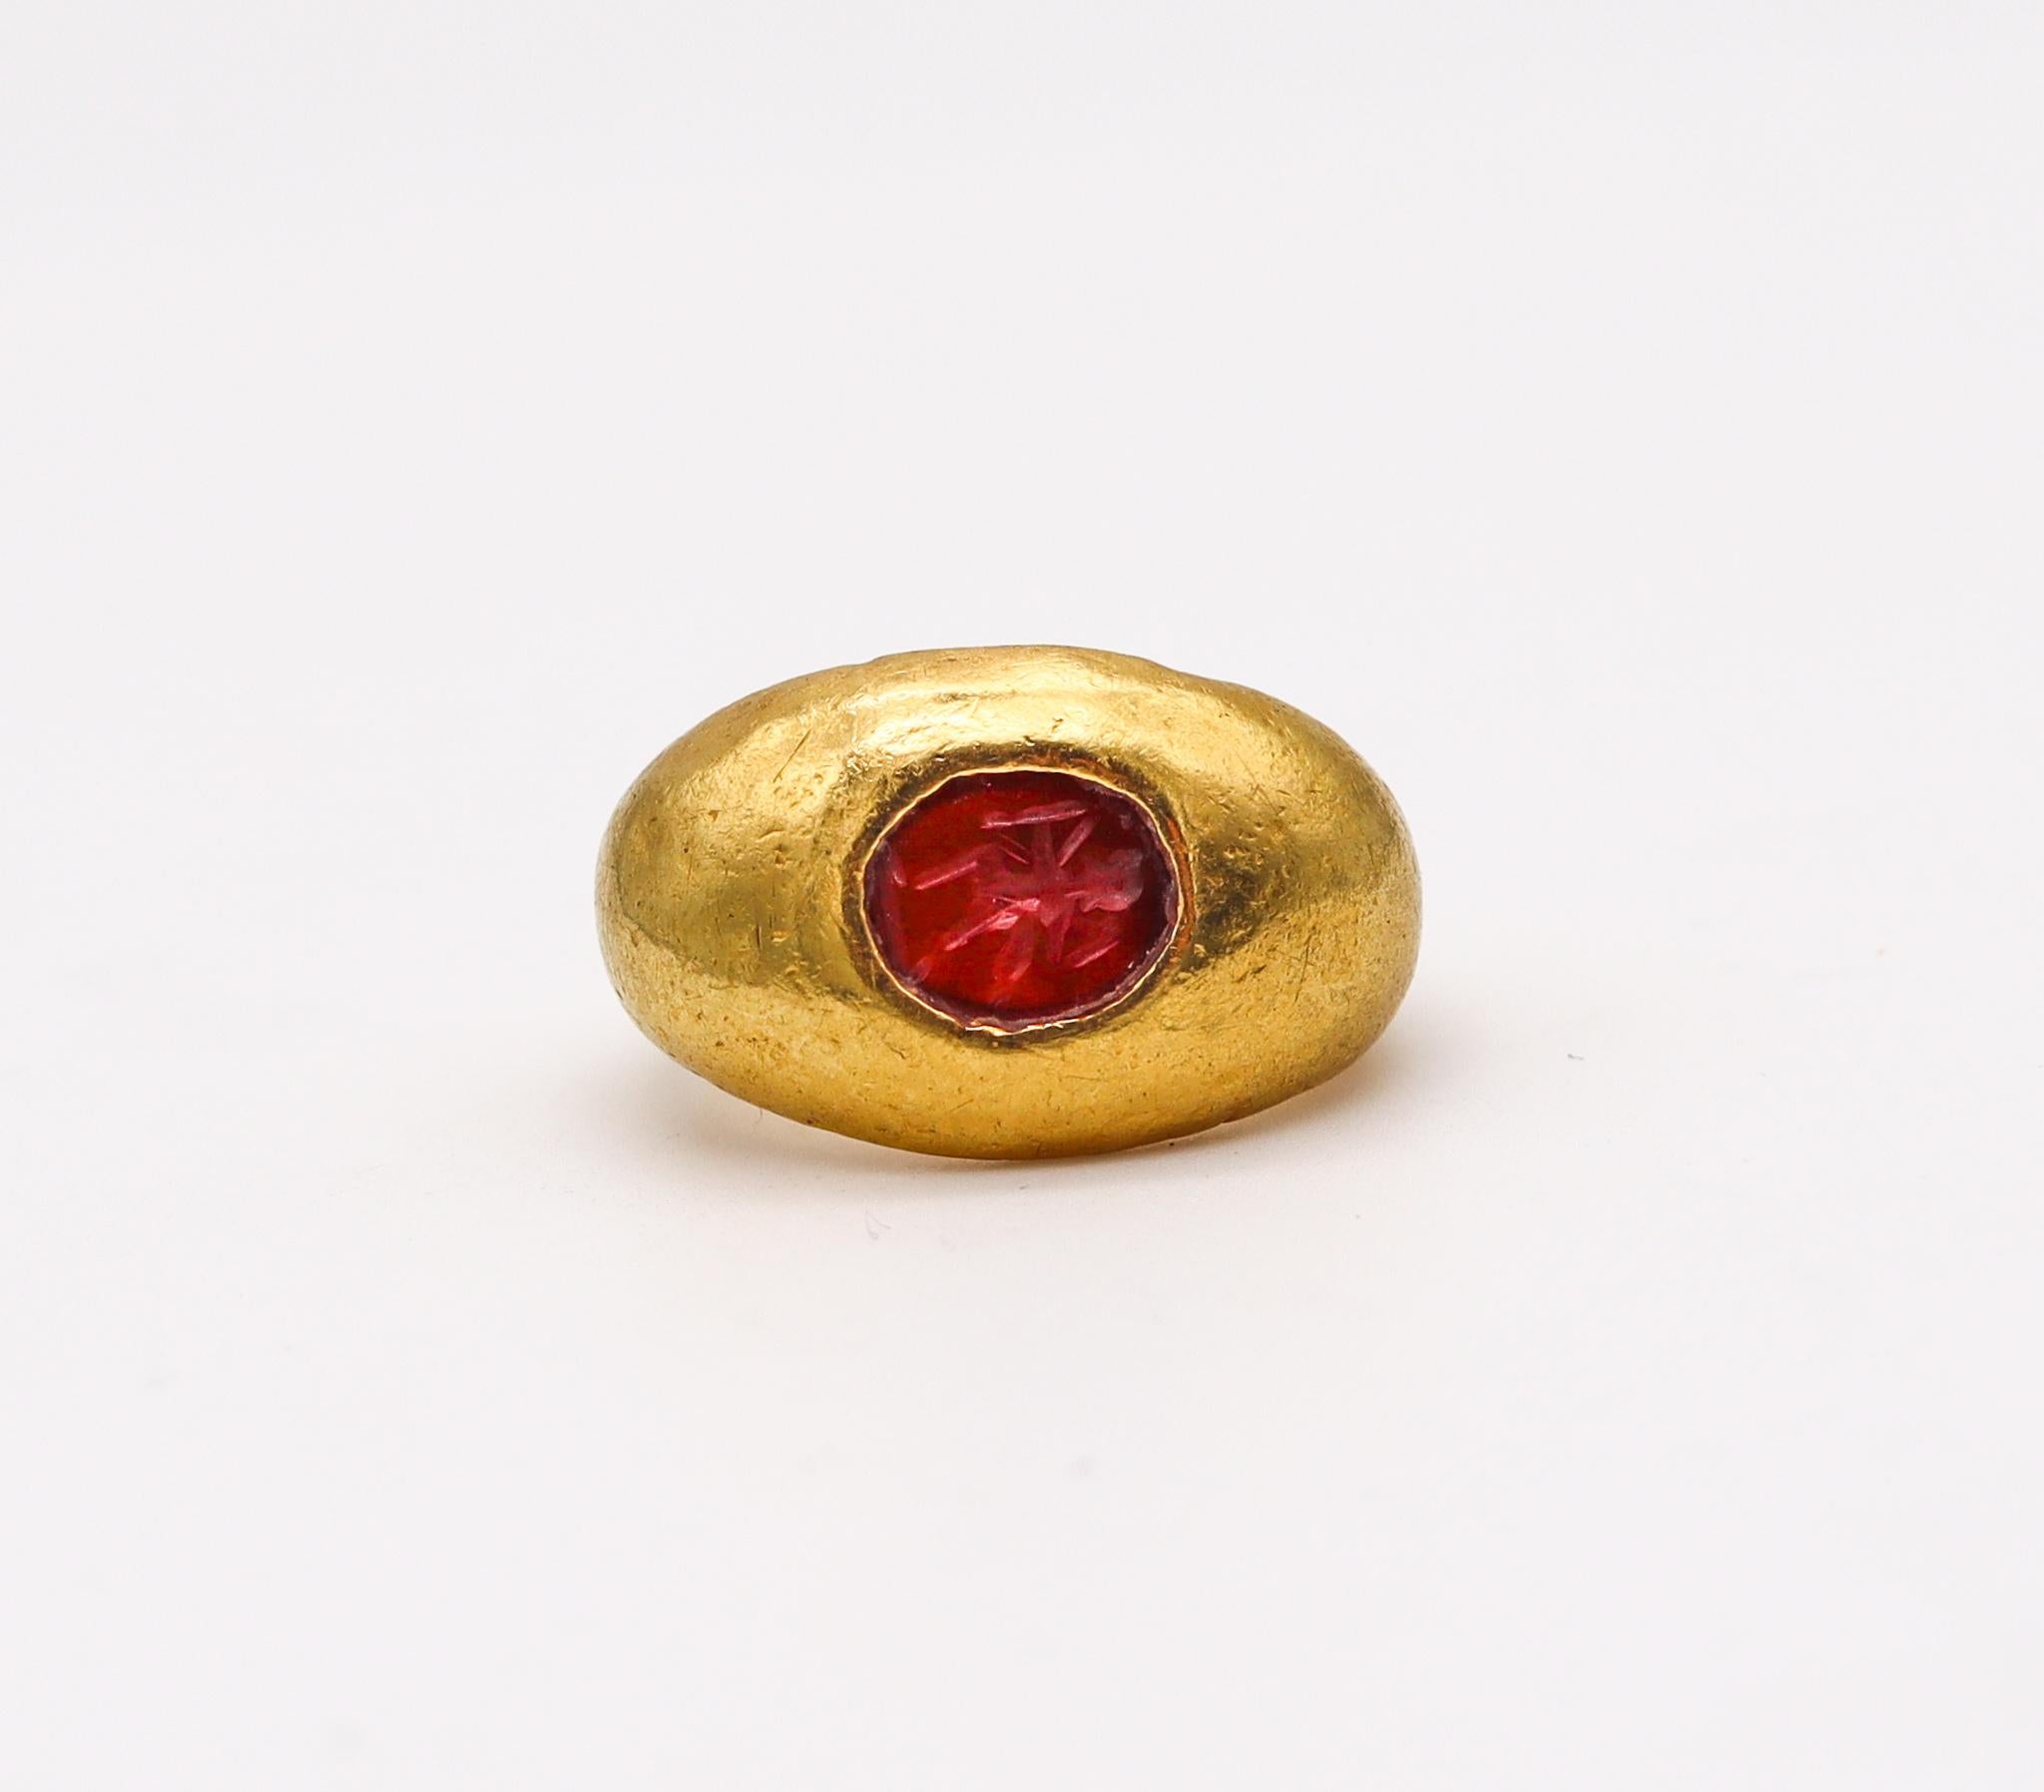 Classical Roman Ancient Rome 100 AD Signet Intaglio Ring 22Kt Yellow Gold with Carved Carnelian